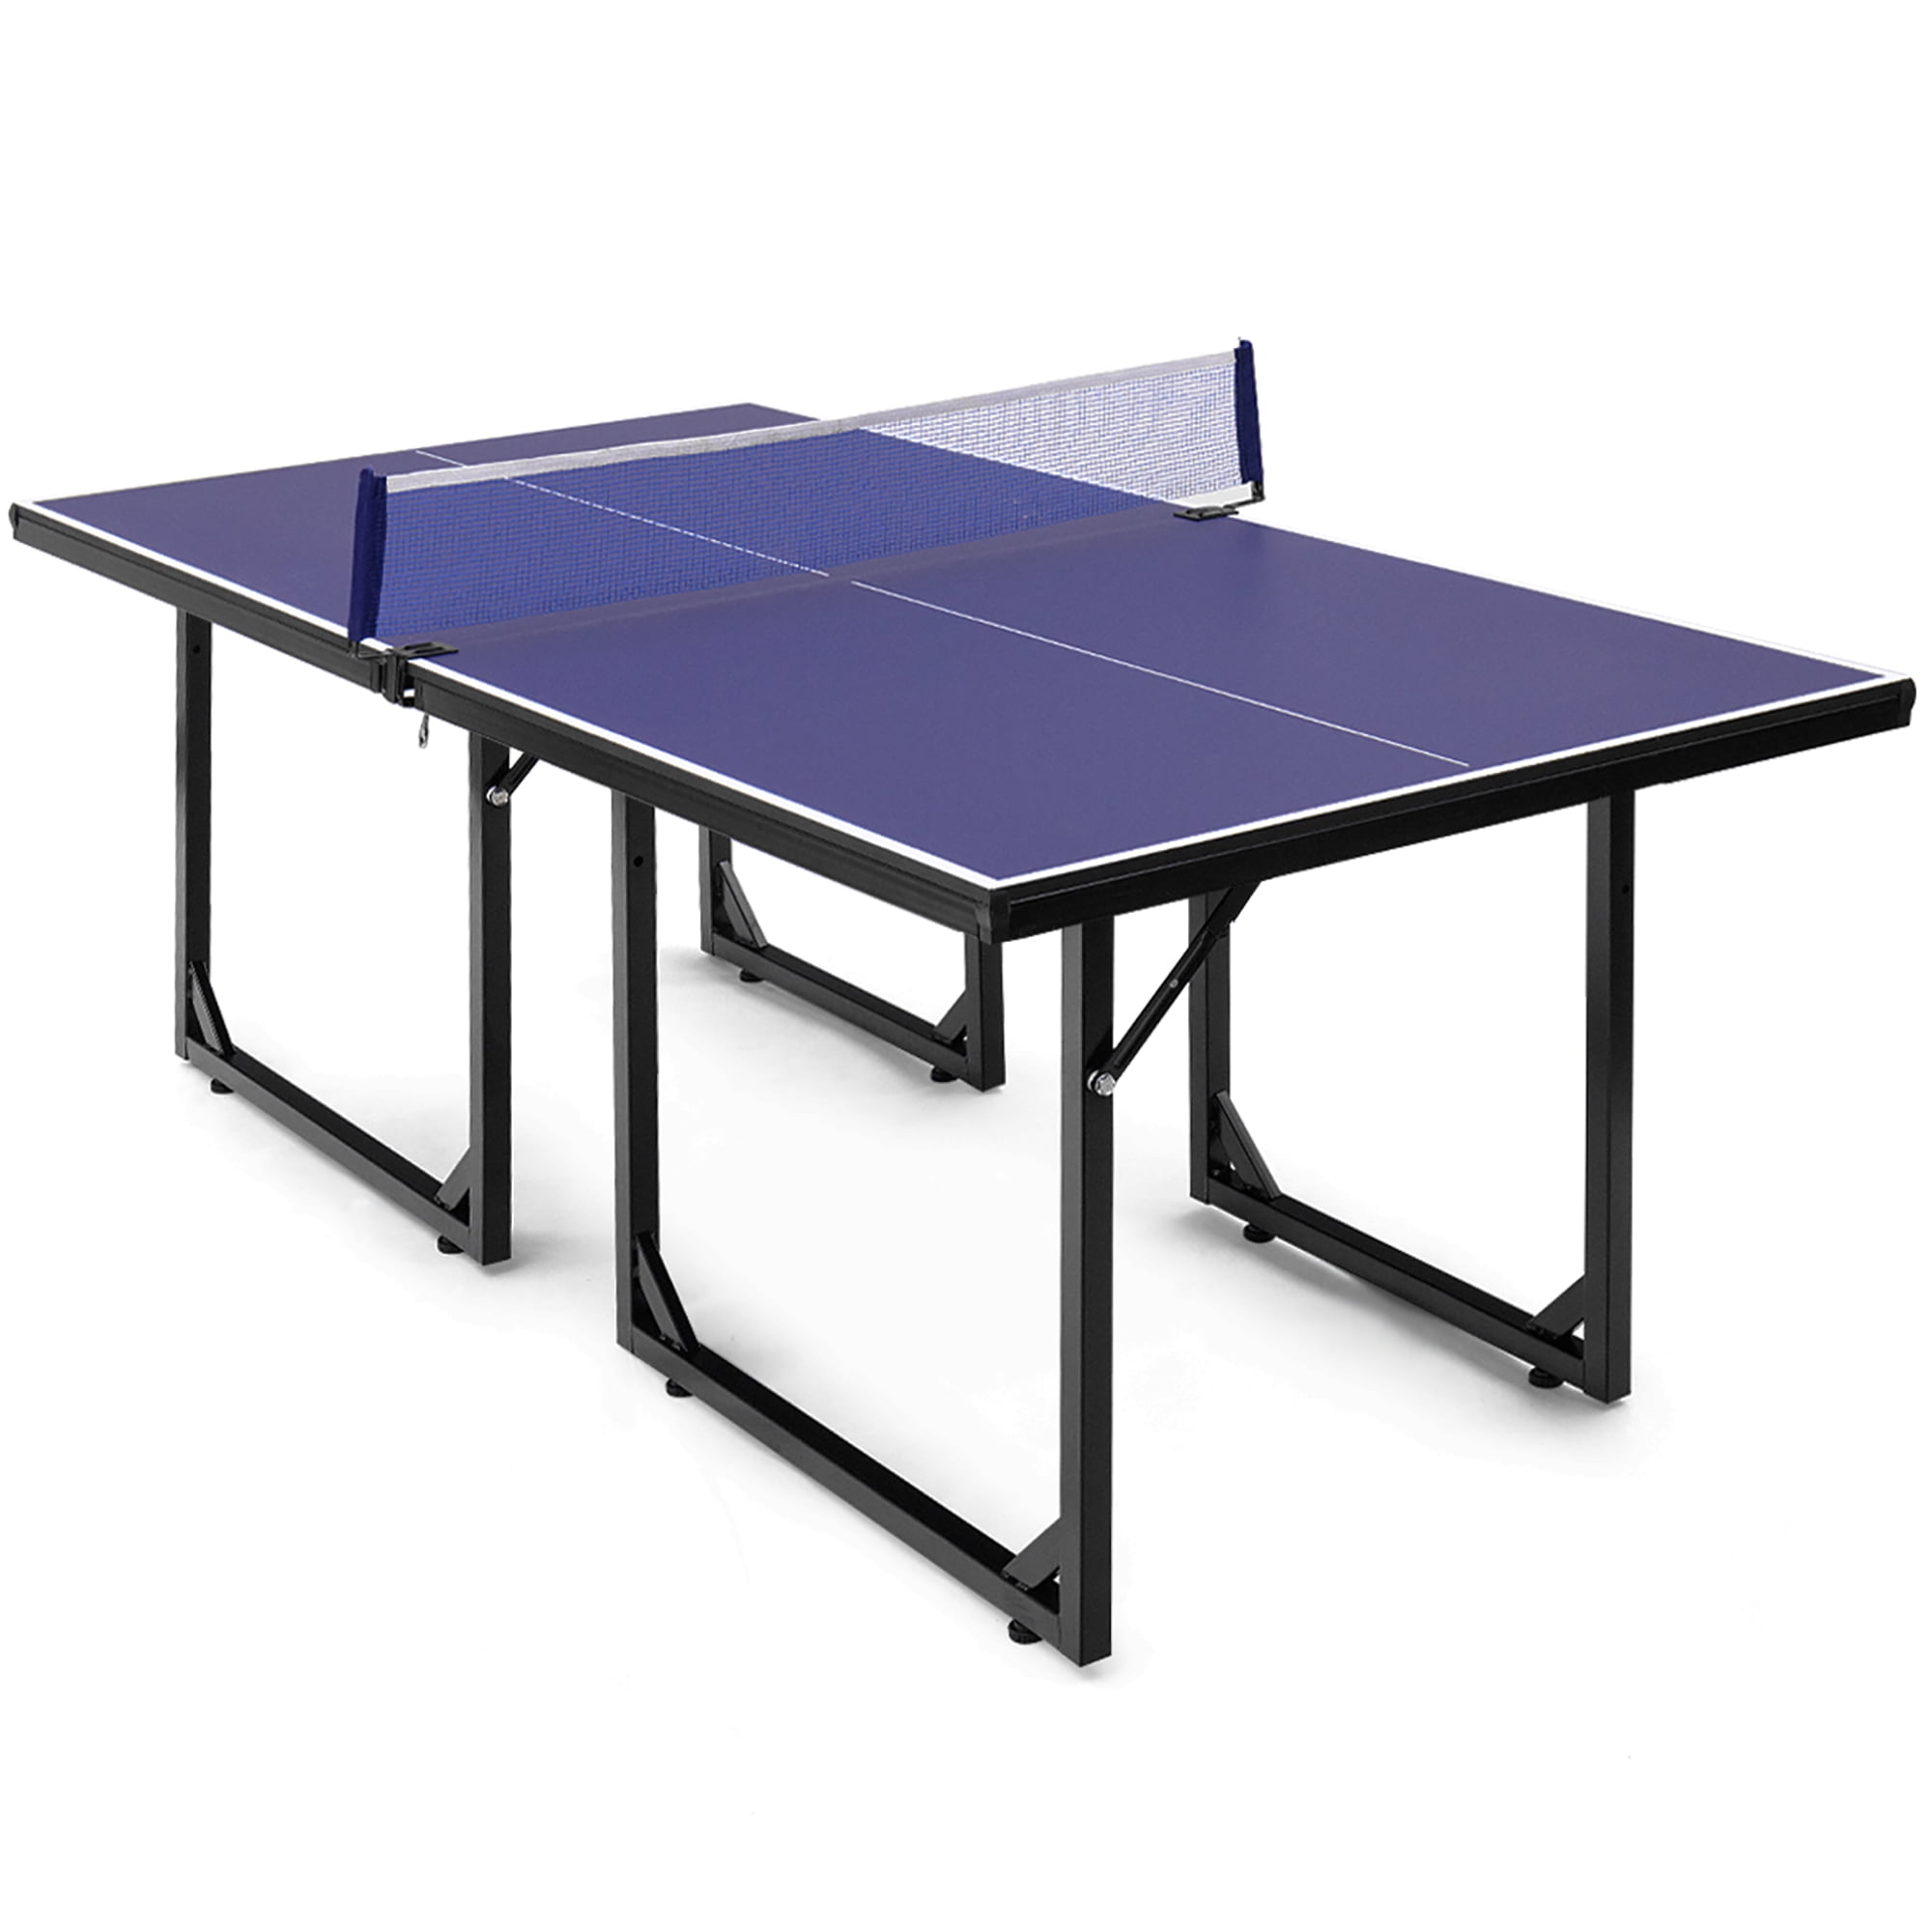 Foldable Portable Table Tennis Ping Pong Table Camping Picnic Game Room Sports 